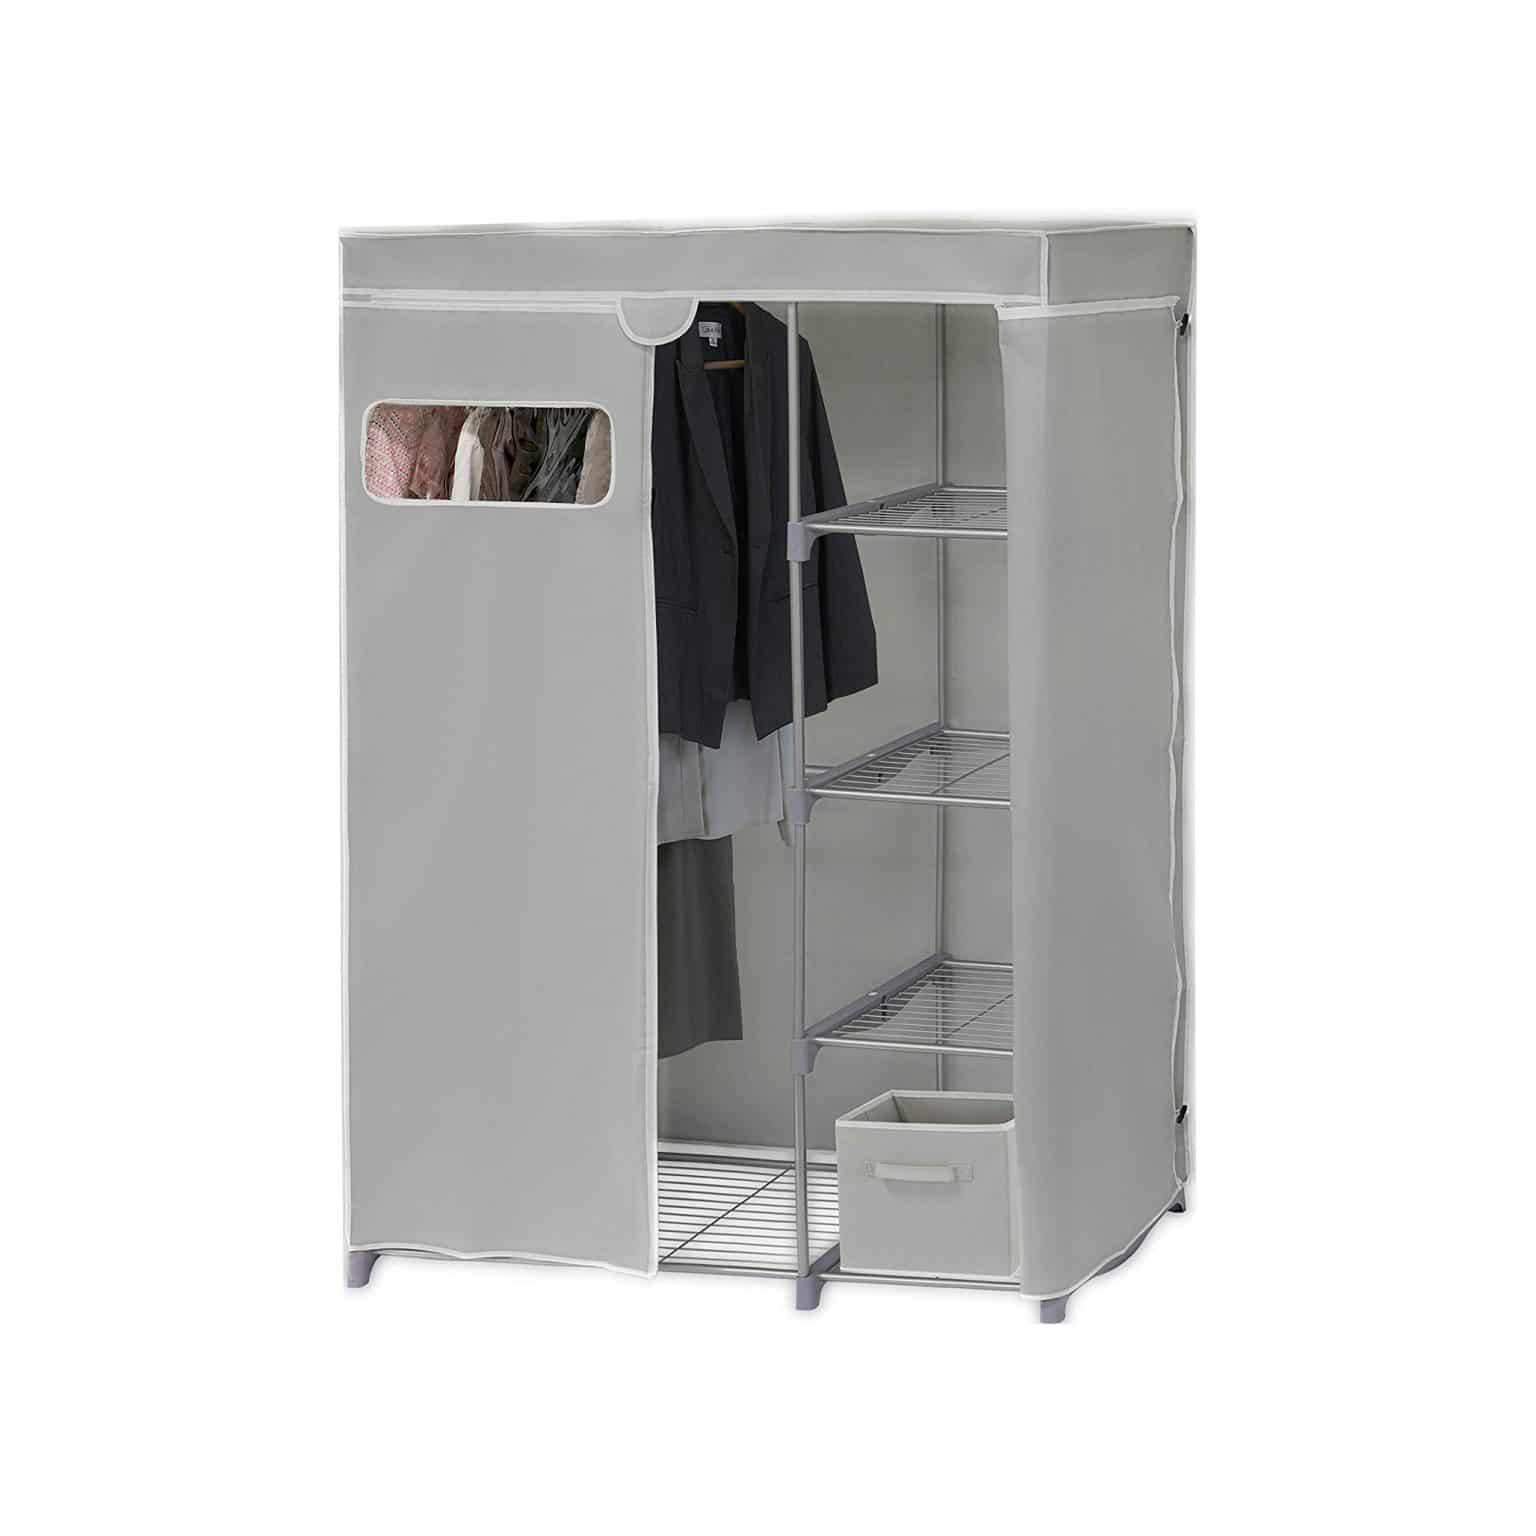 Top 10 Best Portable Clothes Closets in 2021 Reviews | Guide